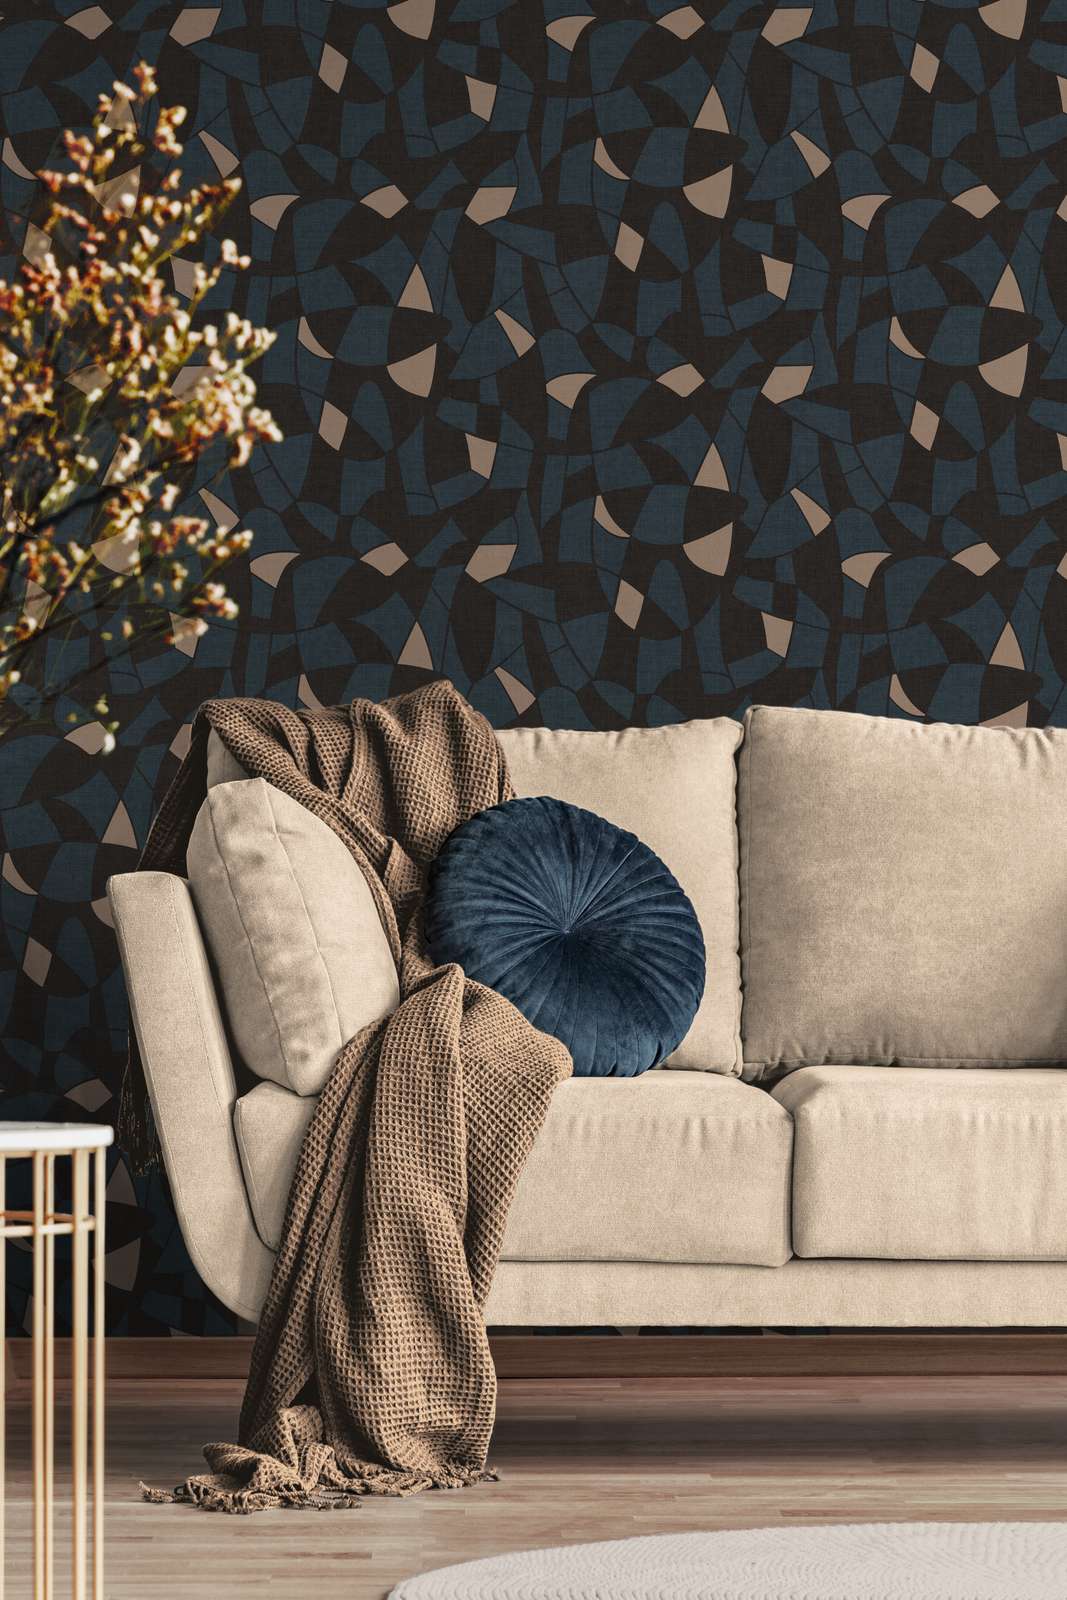             Non-woven wallpaper in dark colours in an abstract pattern - black, blue, beige
        